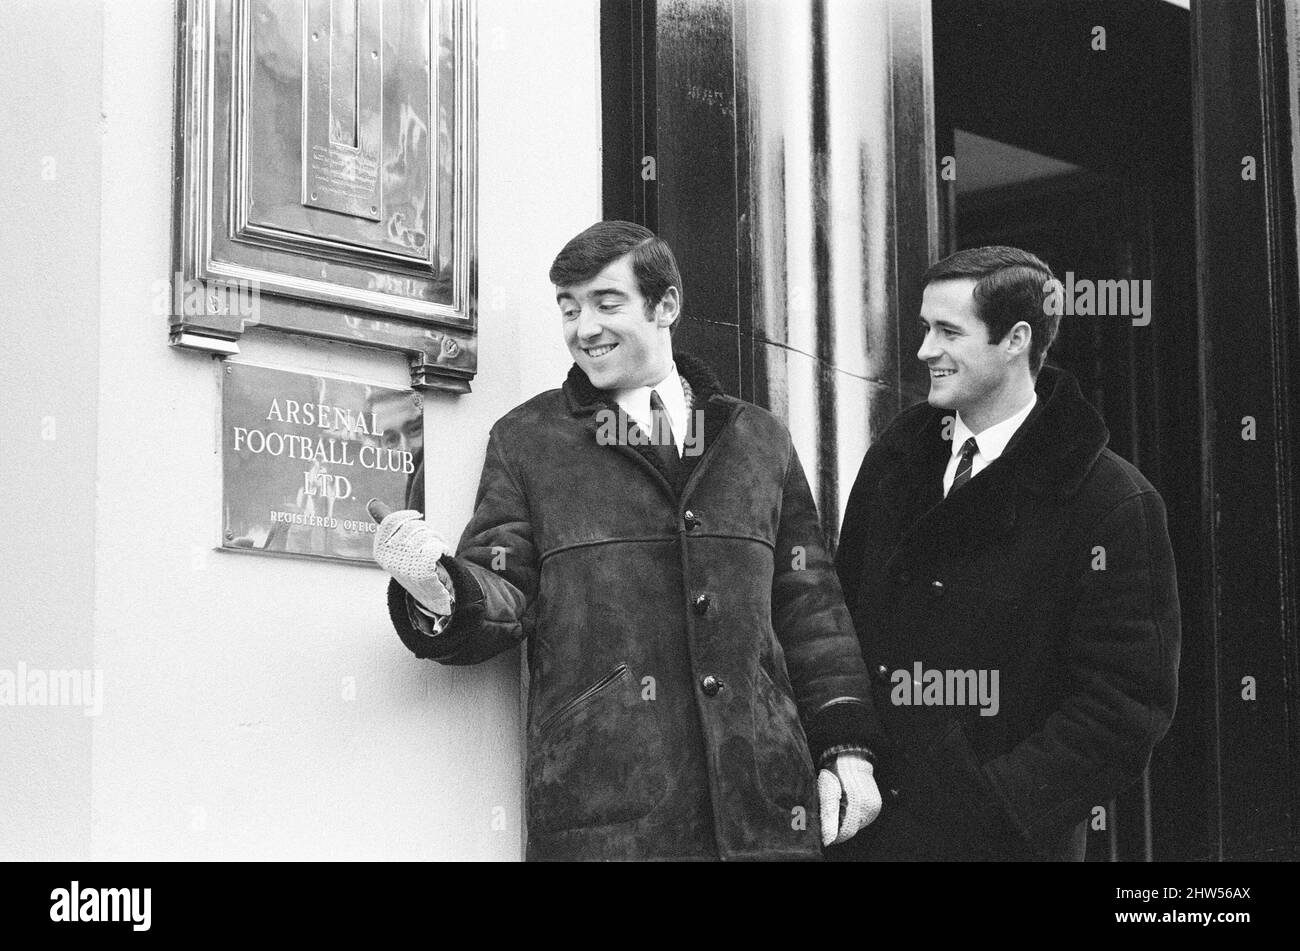 Former teammates, Terry Venables & George Graham, will be playing opposite each other at Highbury this  Saturday (7th January) when the friends and business partners meet each other in the North London Derby. Terry Venables was transferred from Chelsea to Tottenham for 80,000 pounds and George Graham from Chelsea to Arsenal for 75,000 pounds.  Pictured together at Highbury, home of Arsenal Football Club, Thursday 5th January 1967. Stock Photo